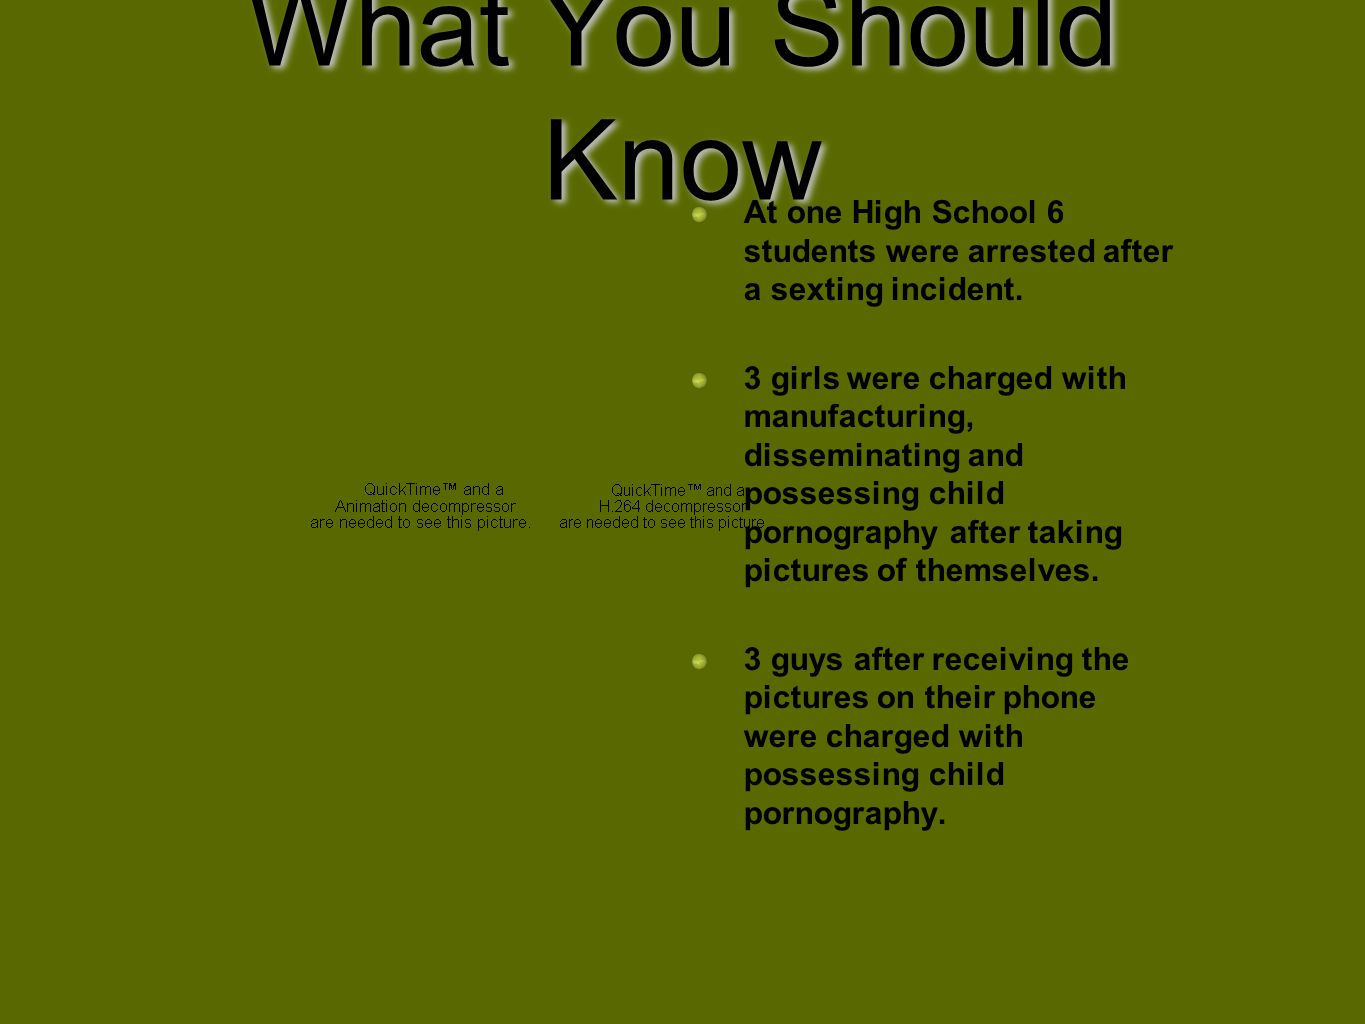 What You Should Know At one High School 6 students were arrested after a sexting incident.